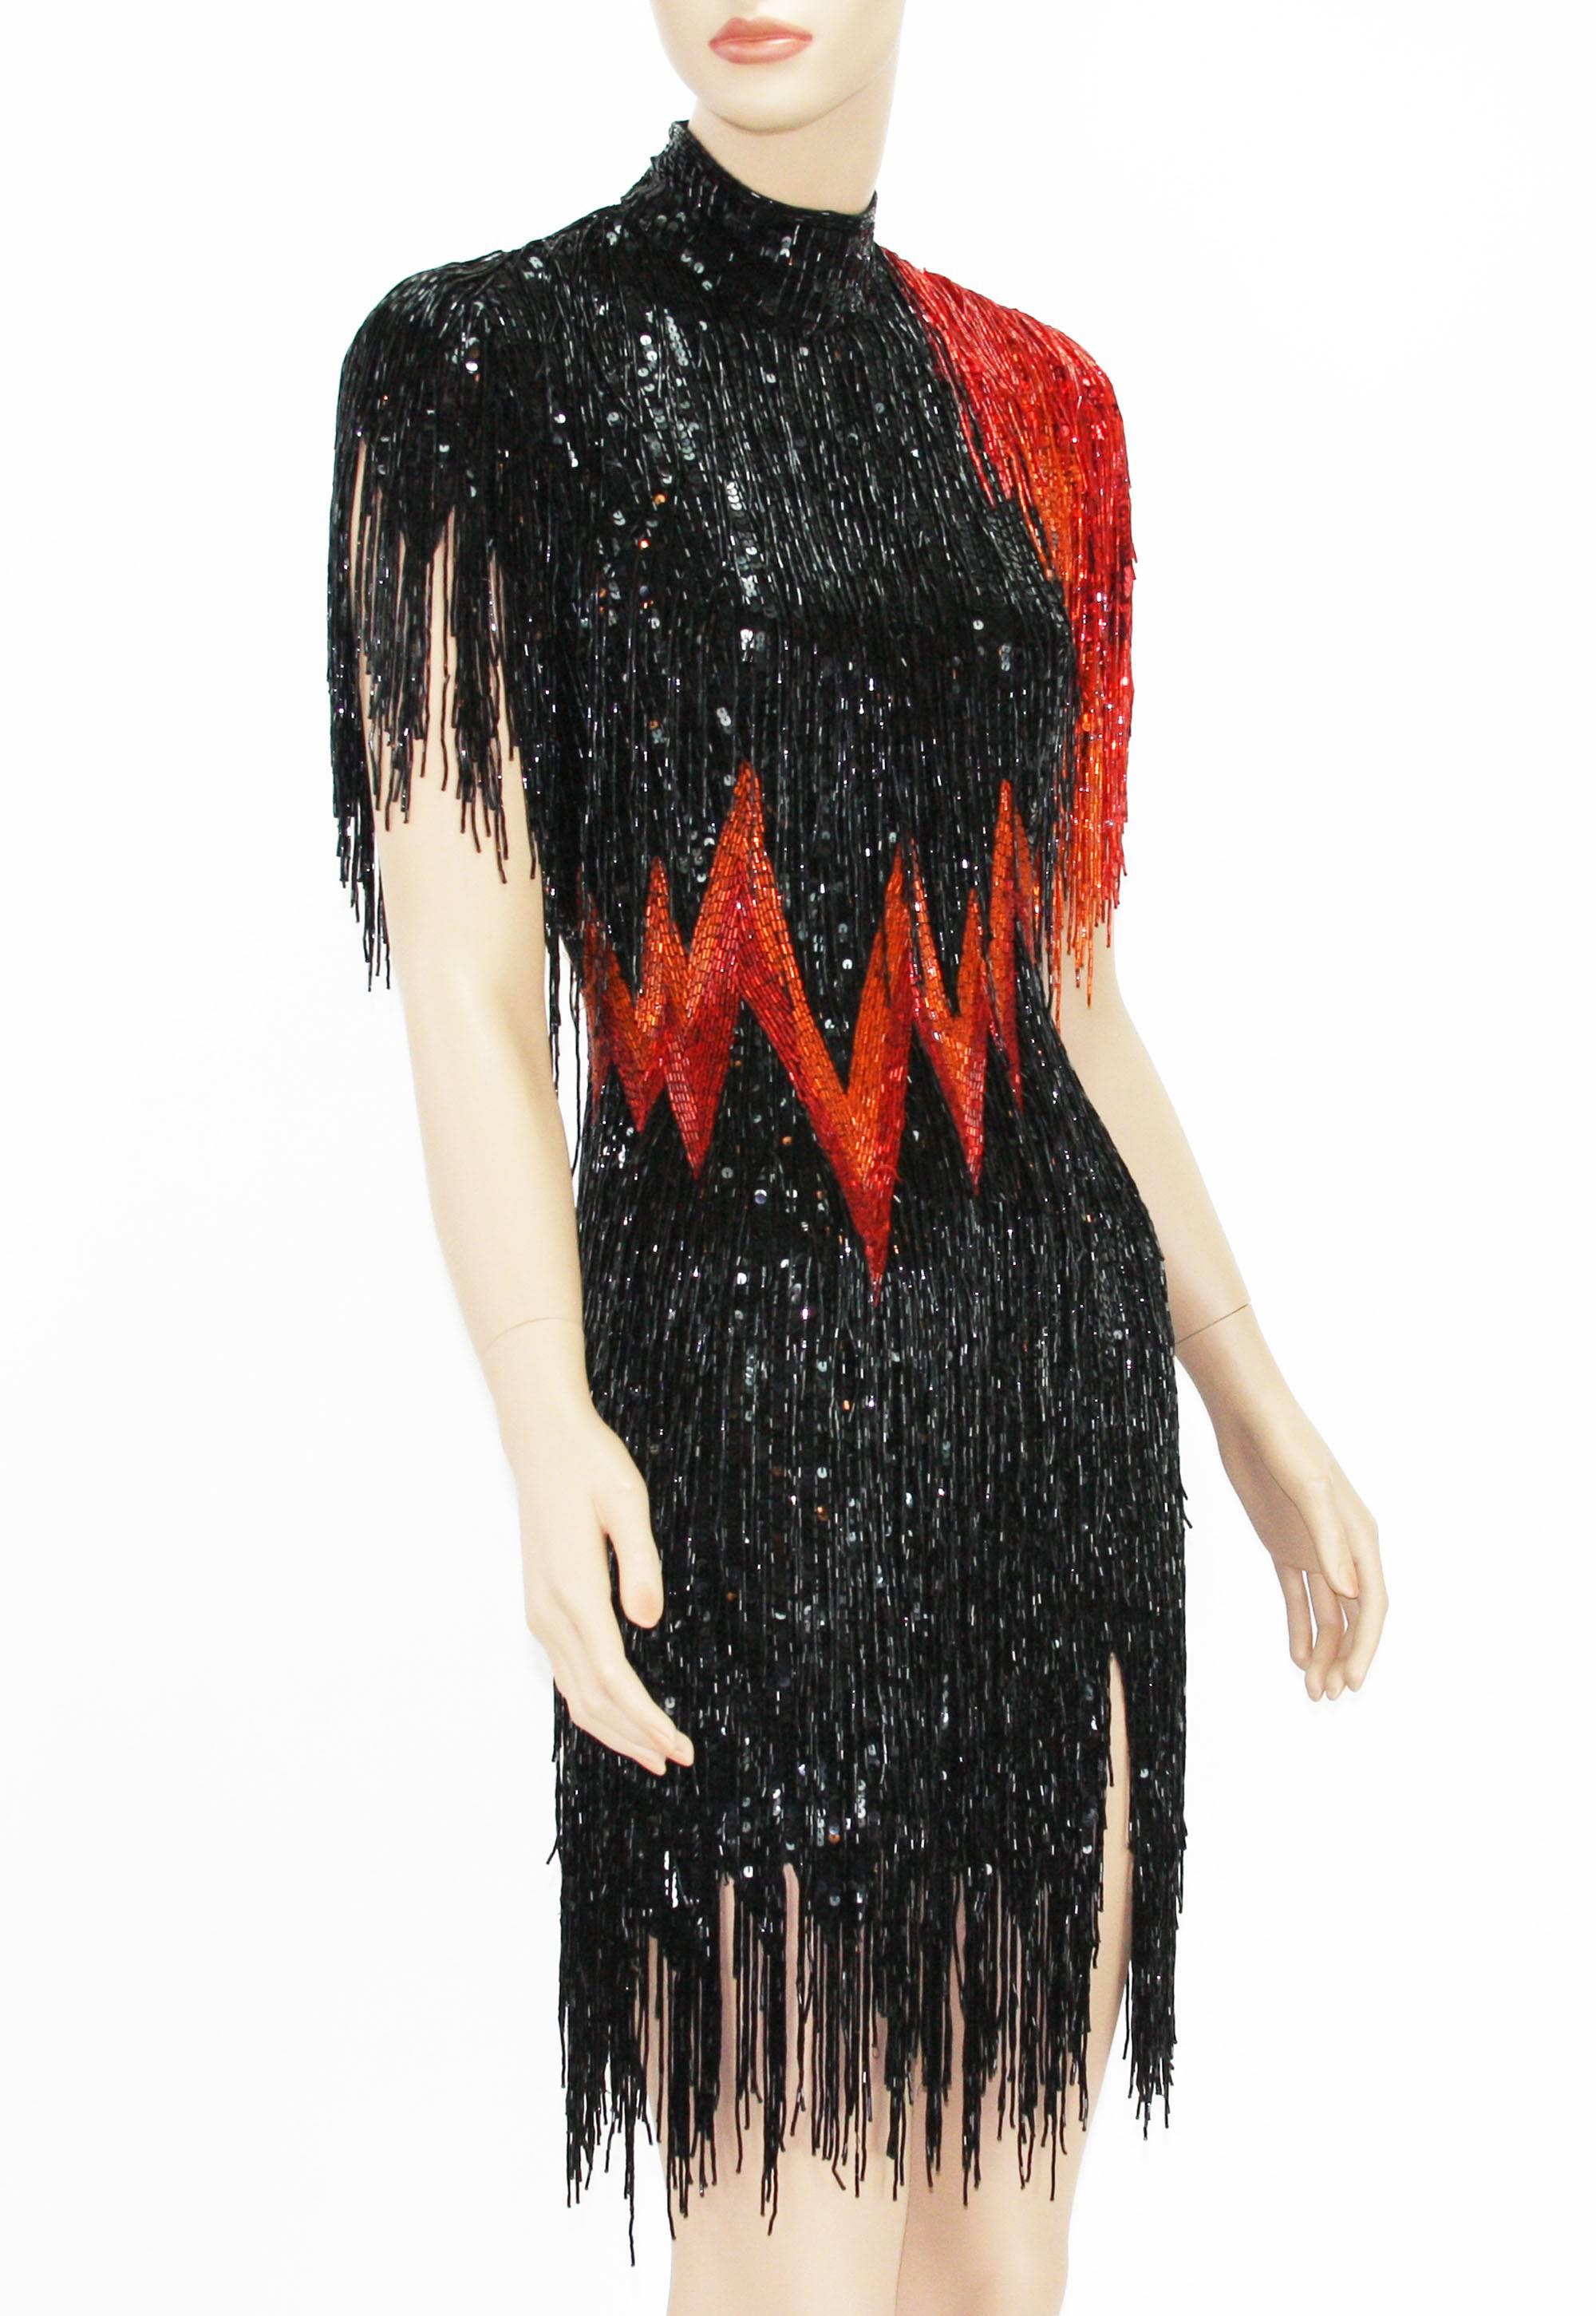 Black Bob Mackie Fully Beaded Dress with Gloves from European Dance Competition, 1980s